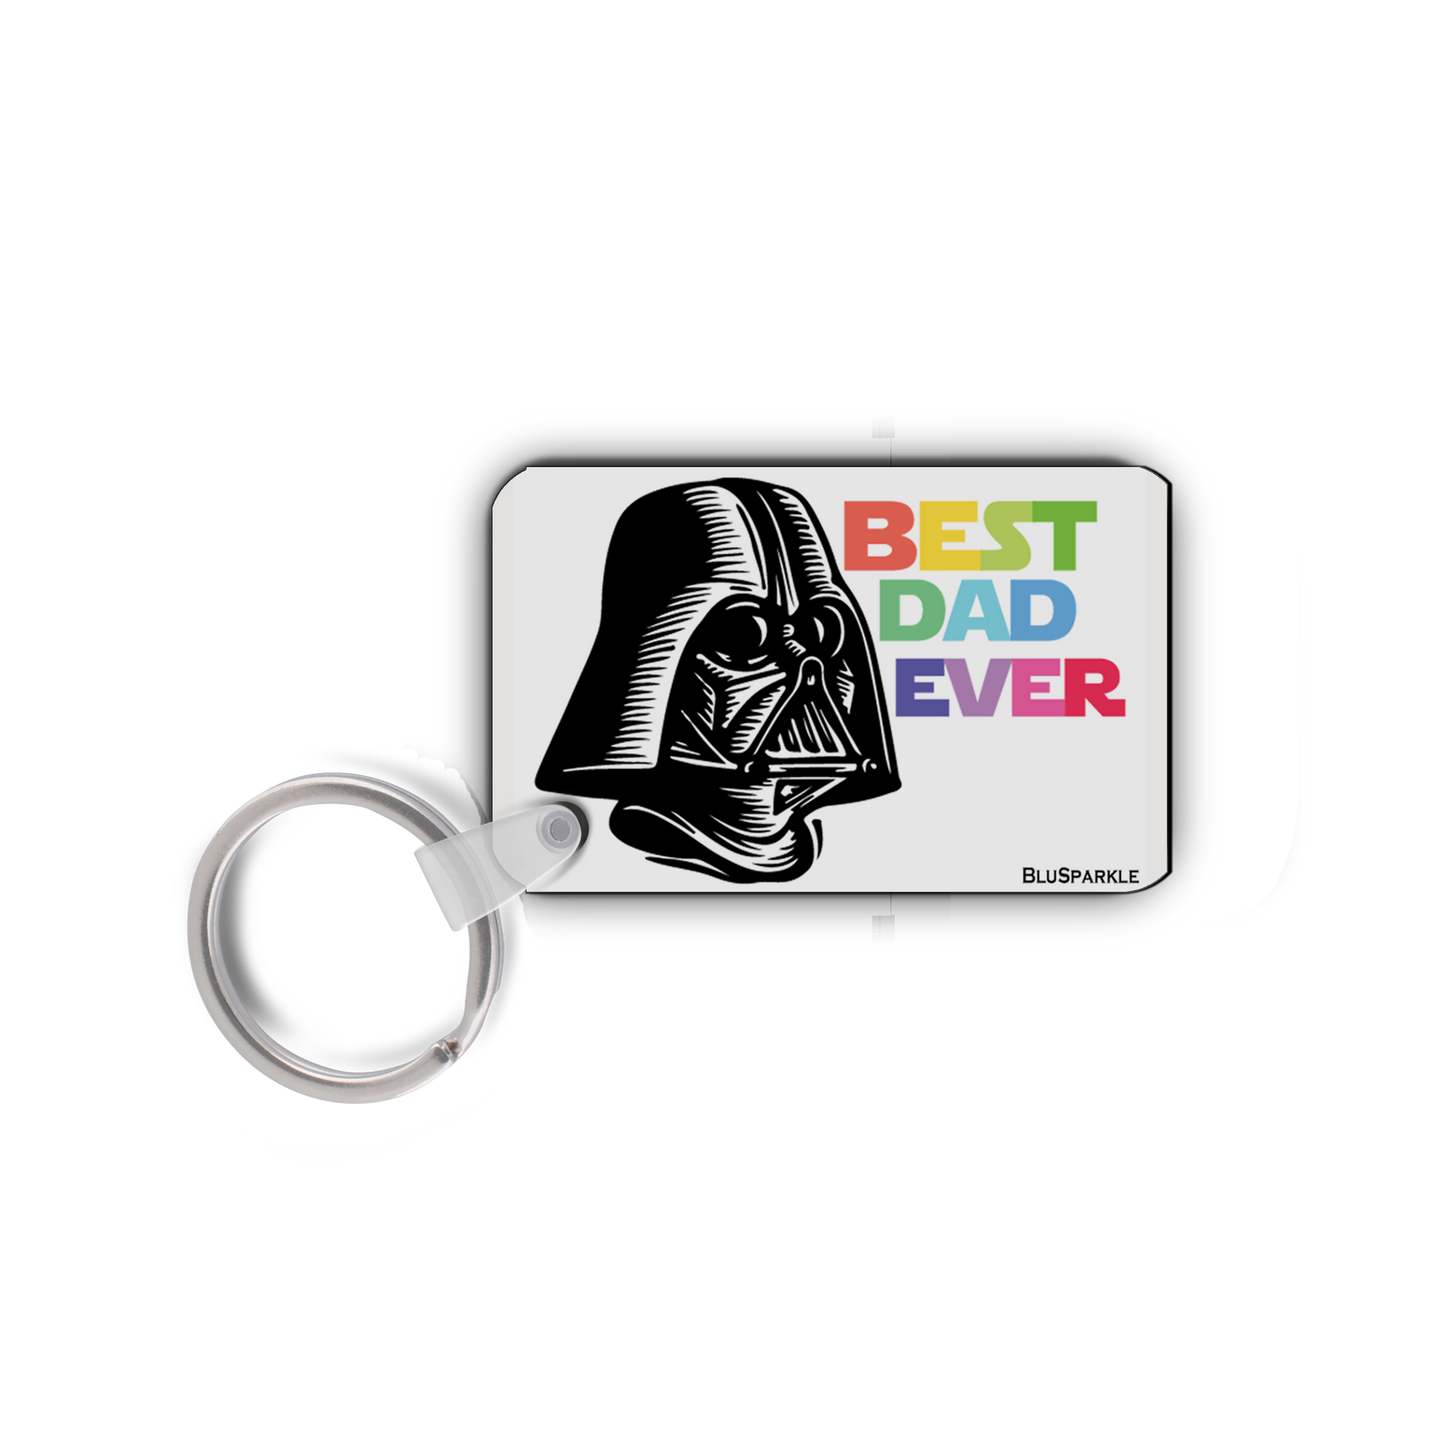 Best Dad Ever Double-Sided Key Chain